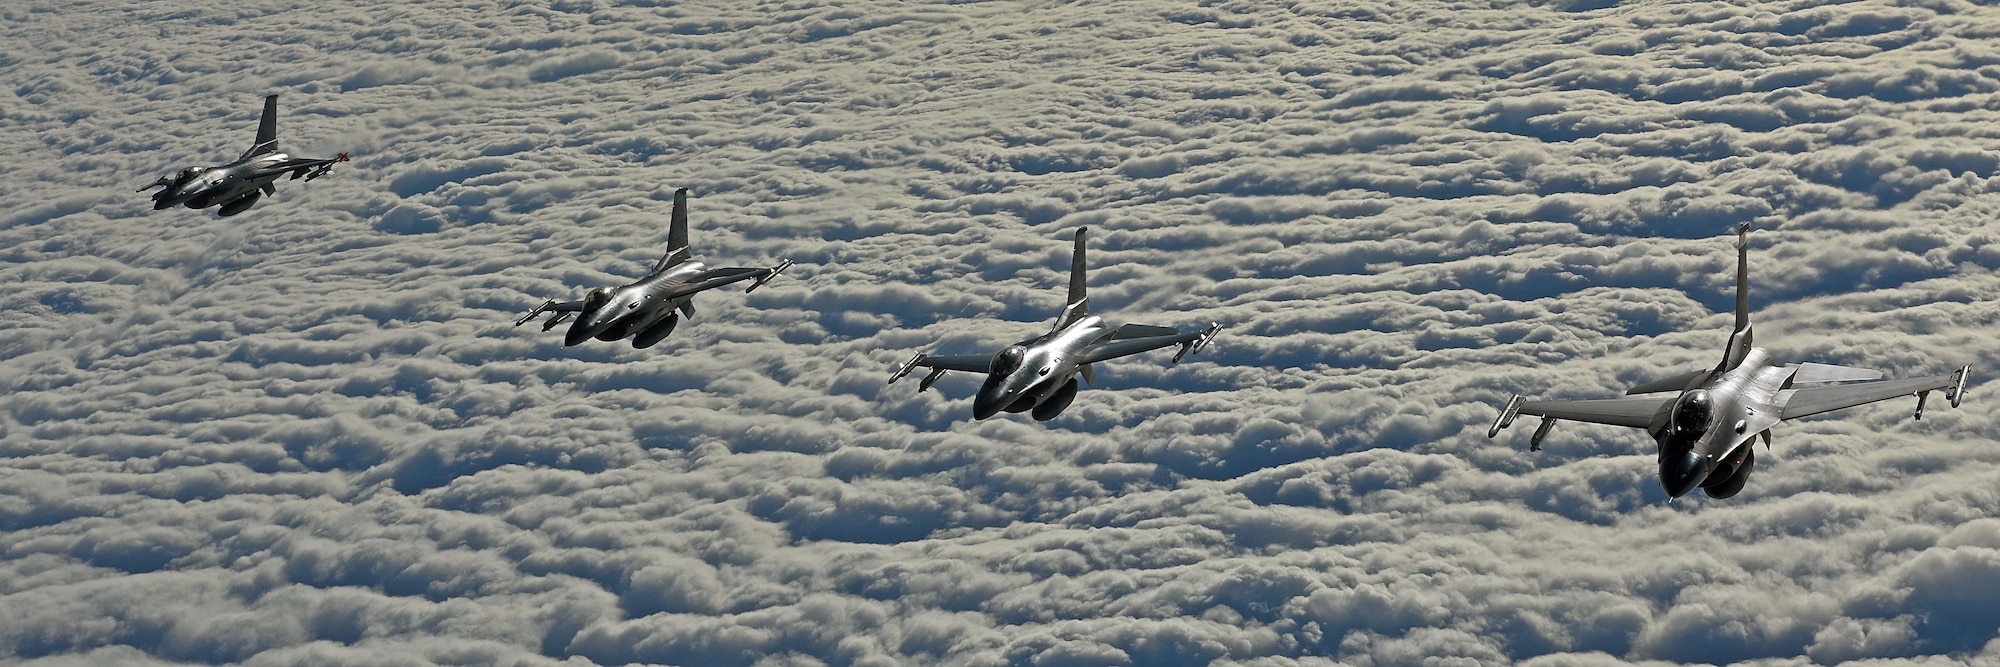 Four U.S. Air Force F-16C Fighting Falcons fly in formation during air refueling training in Swedish airspace, Feb. 8, 2018. The training was in conjunction with a rotational deployment of F-16Cs from the Ohio Air National Guard’s 180th Fighter Wing to Amari Air Base, Estonia, as part of a Theater Security Package. (U.S. Air Force photo by Airman 1st Class Luke Milano)